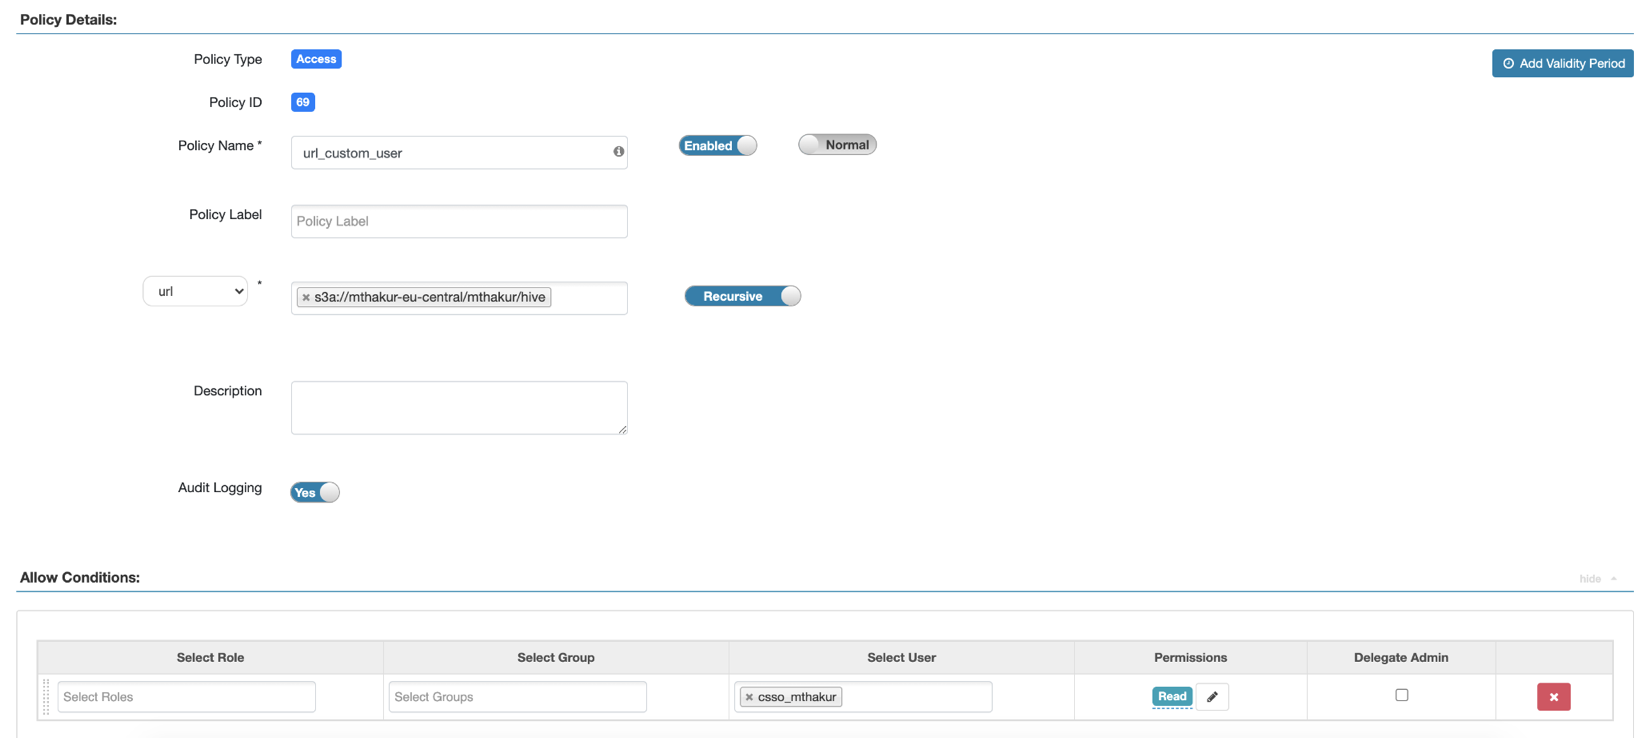 The image shows the Policy Details page in Ranger UI to create a Hive URL authorization policy on an S3 path for an end user.